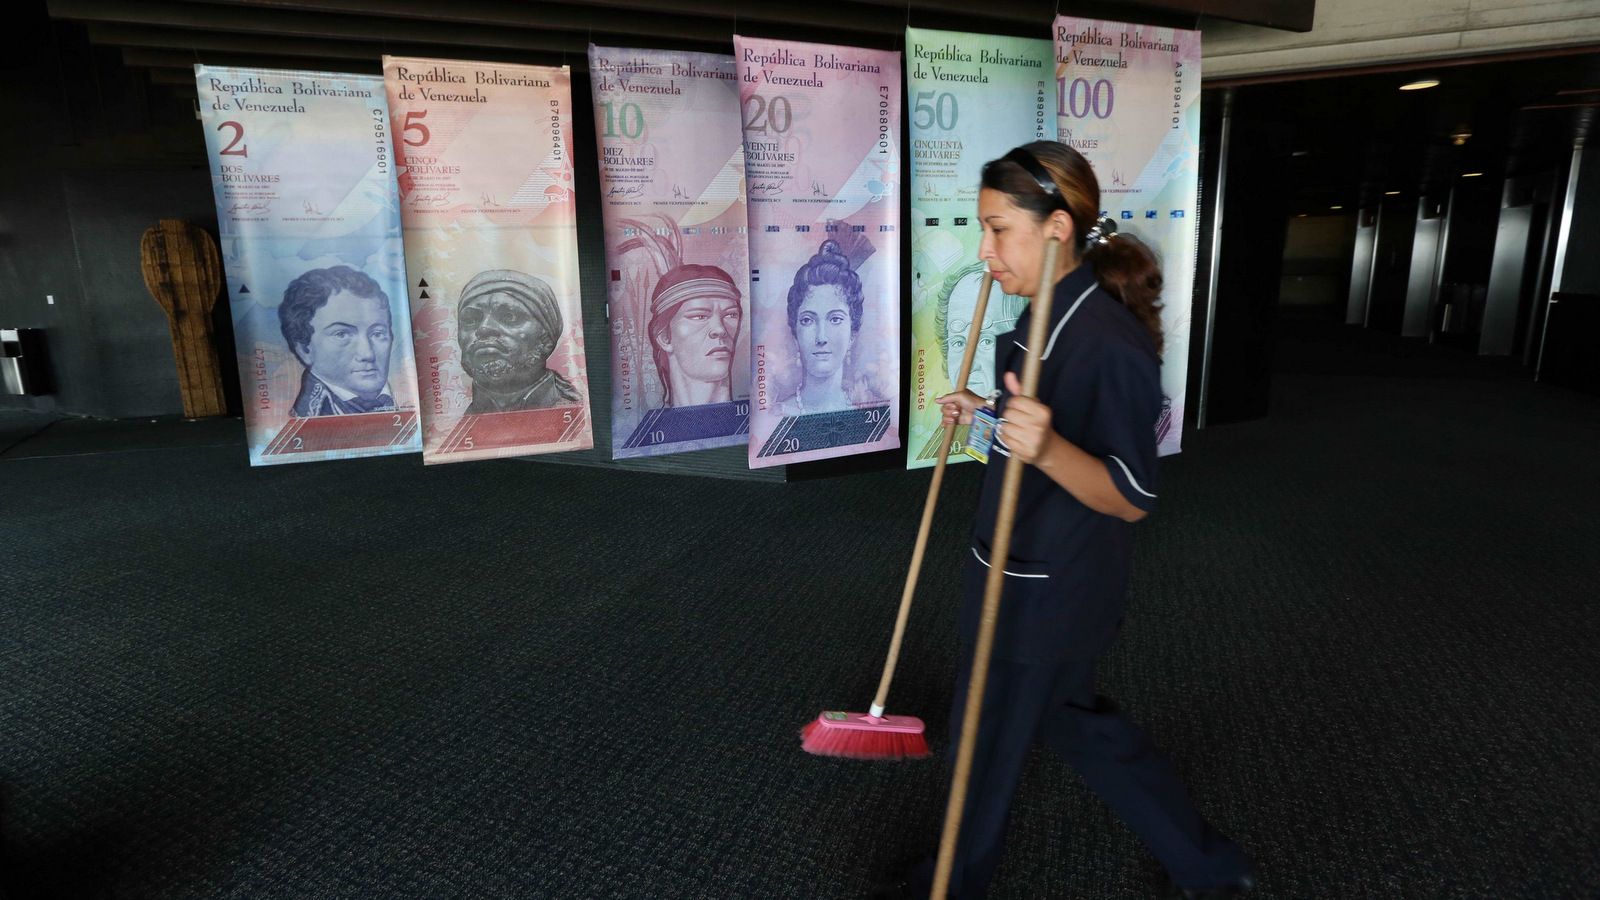 A cleaning woman walks by replicas of Venezuela's currency bills, hung in a hallway at the Central bank office building in Caracas, Venezuela. (AP/Ariana Cubillos)